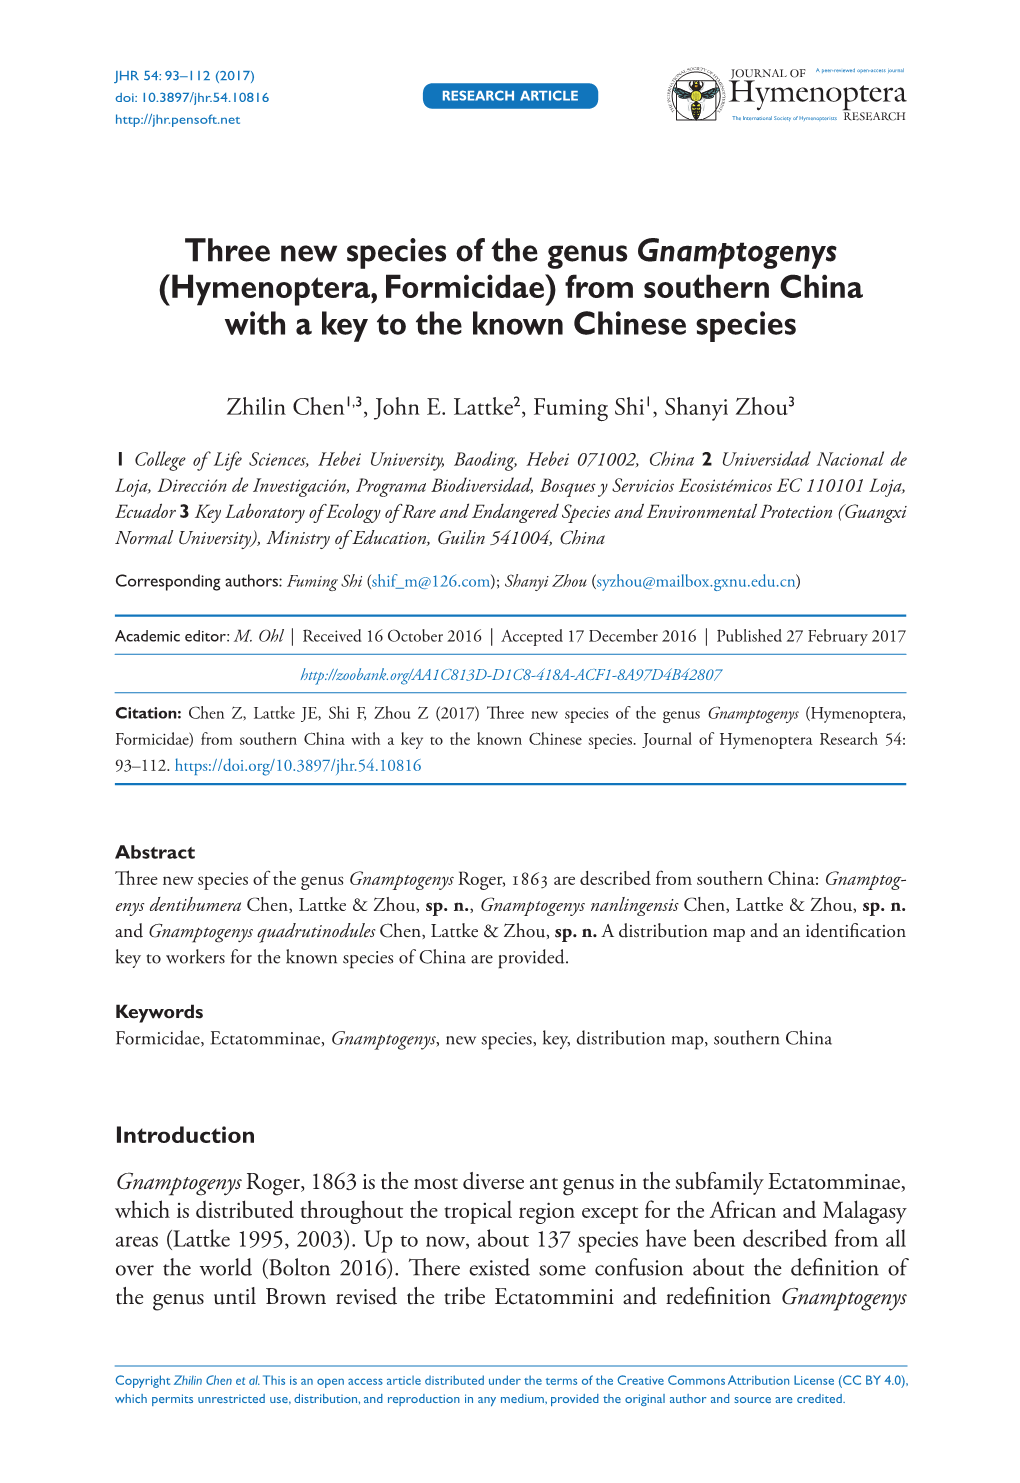 Three New Species of the Genus Gnamptogenys (Hymenoptera, Formicidae) from Southern China with a Key to the Known Chinese Species